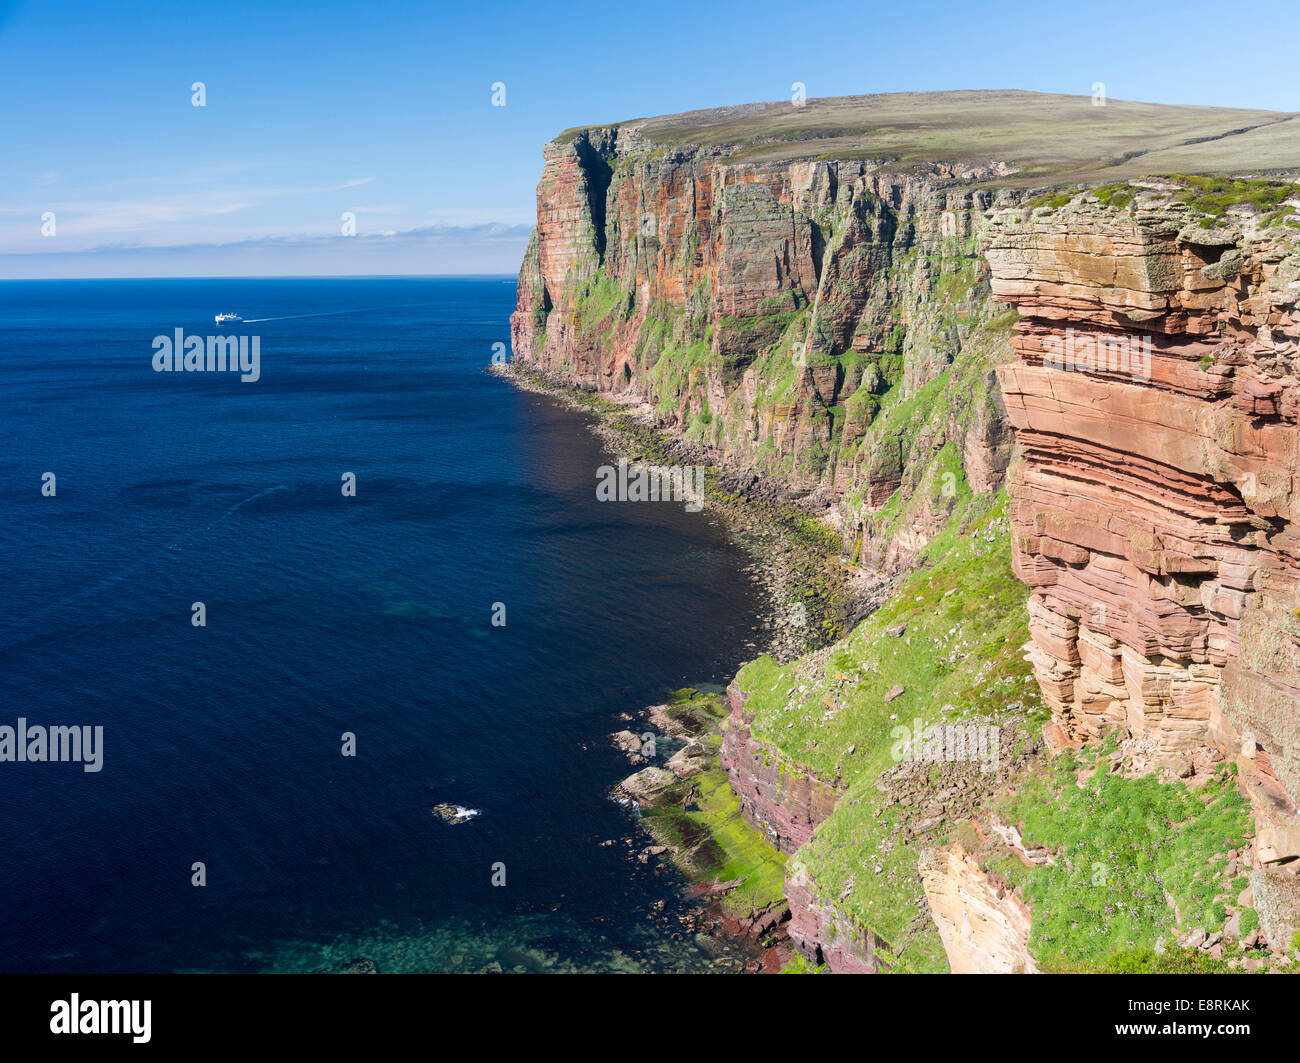 The cliffs of Hoy island near the Old Man of Hoy, View of the Brae Brough Cliffs and St Johns Head, Orkney islands, Scotland. Stock Photo